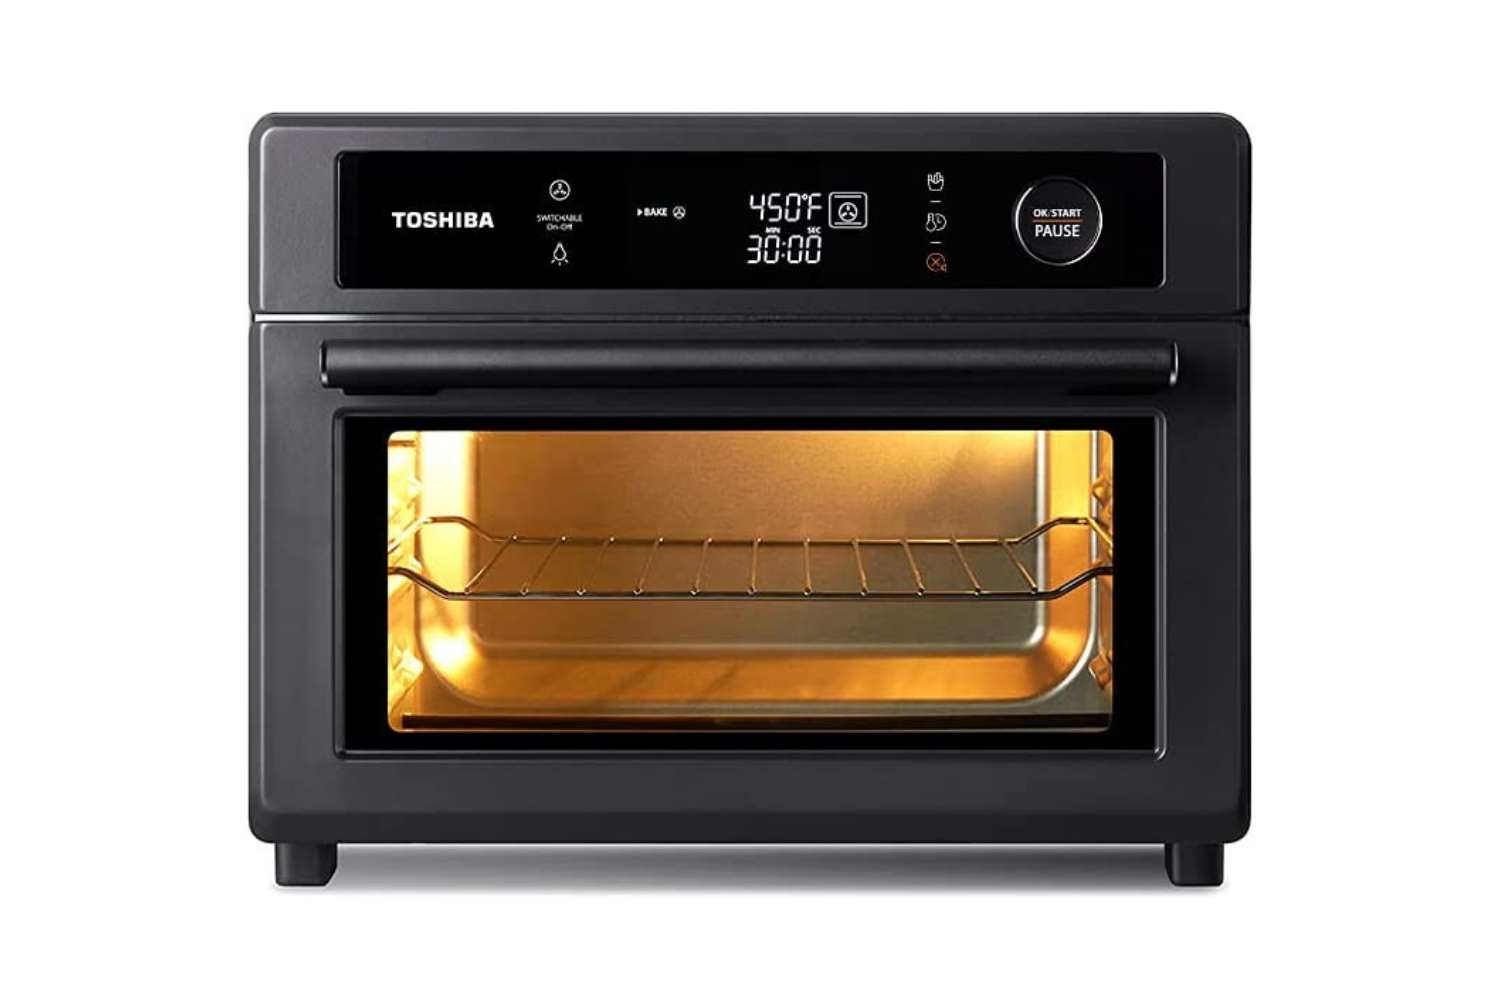 Toshiba Air Fryer 13-in 1 Toaster Oven